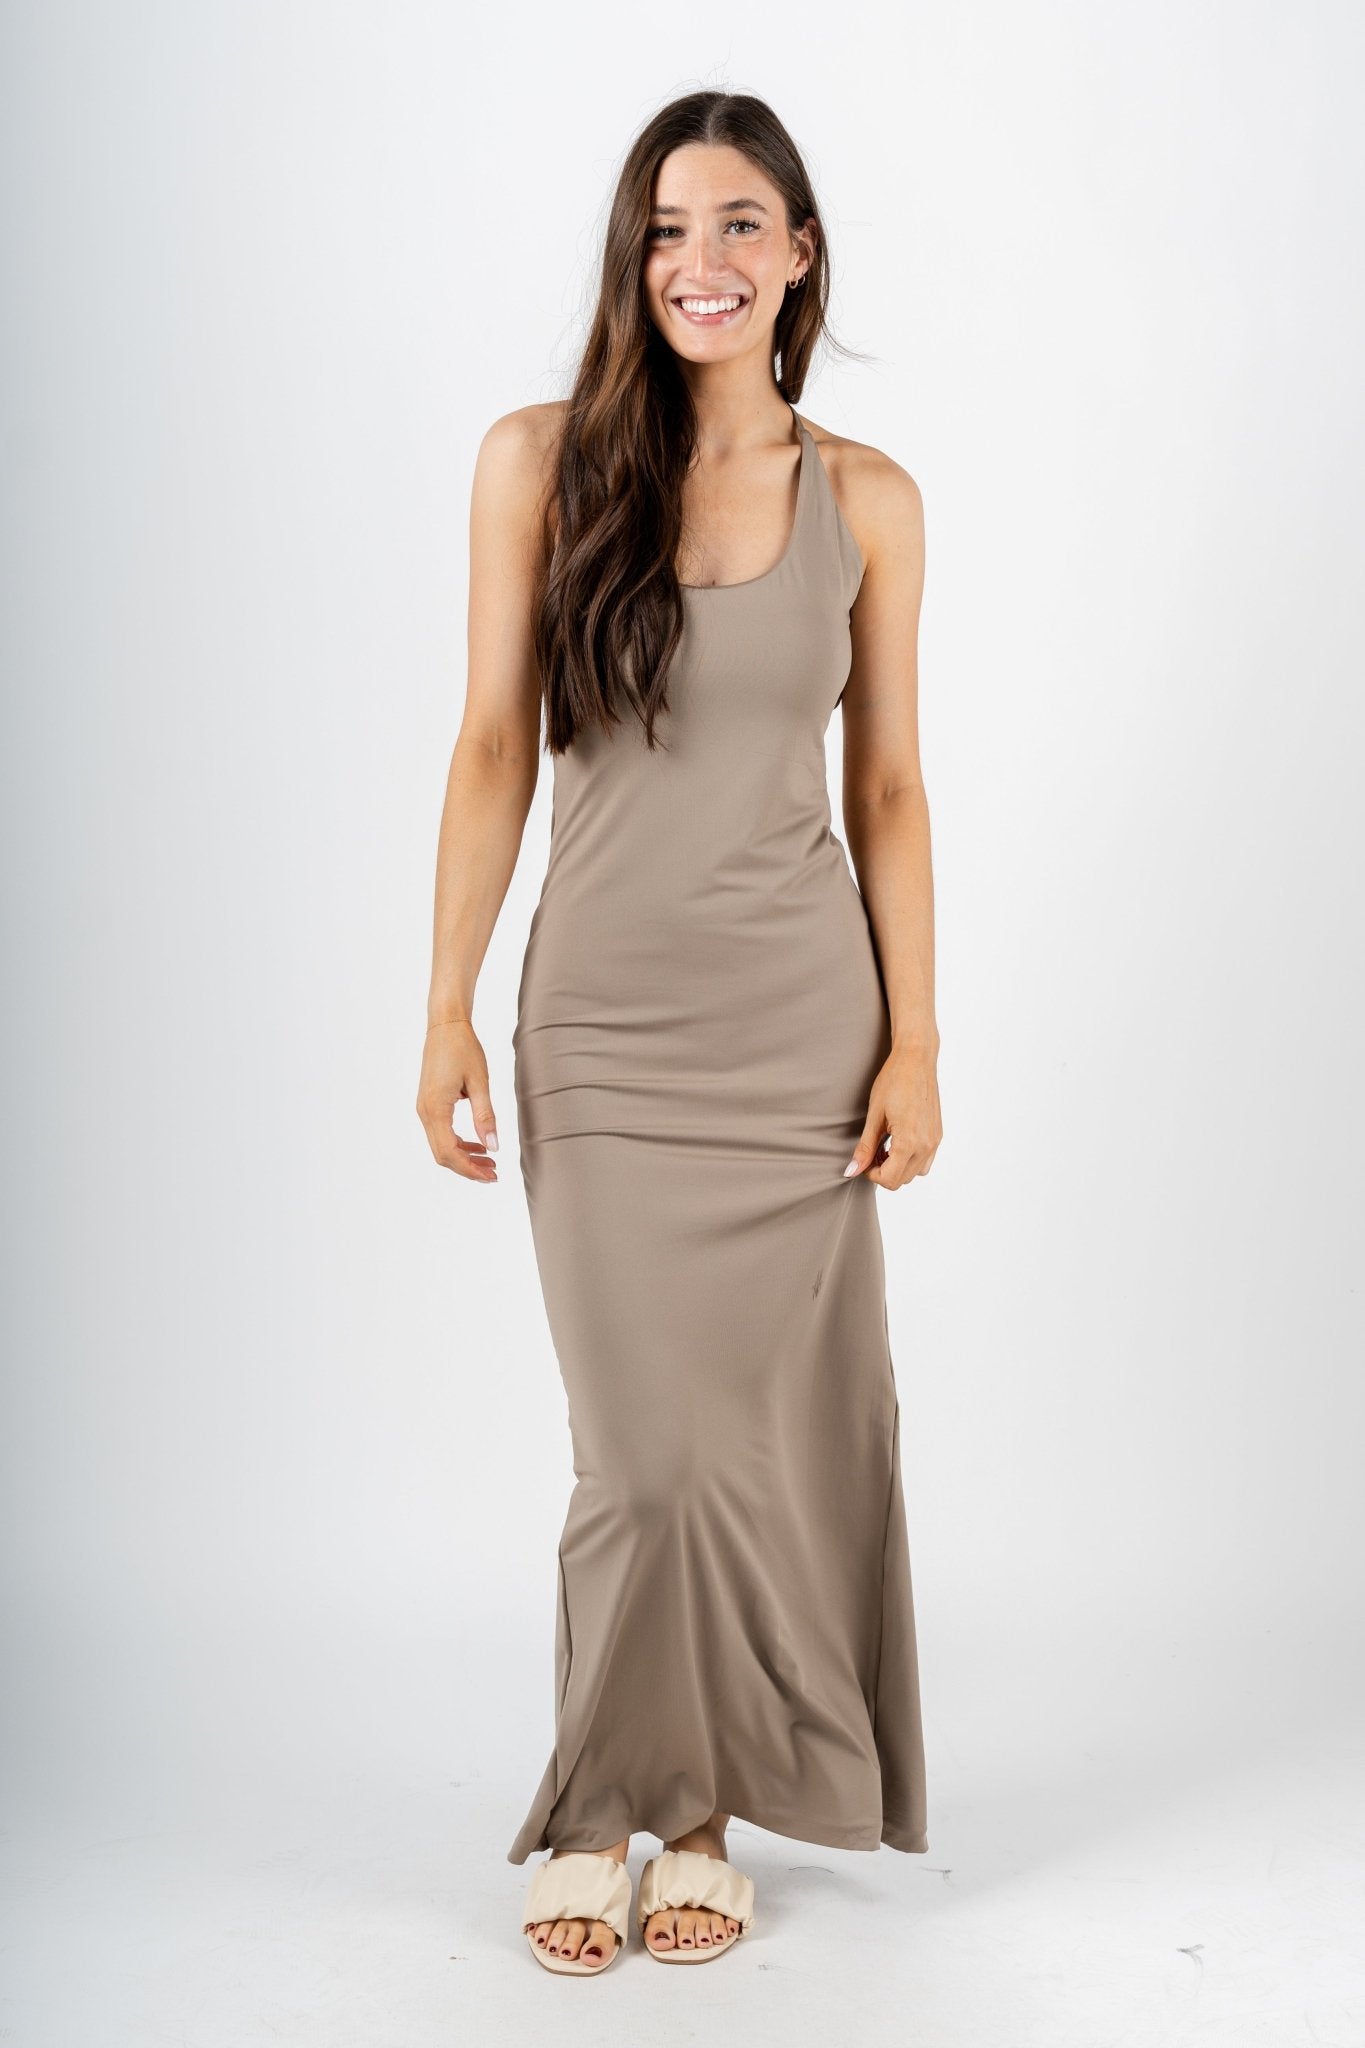 Knit maxi dress taupe - Affordable Dress - Boutique Dresses at Lush Fashion Lounge Boutique in Oklahoma City